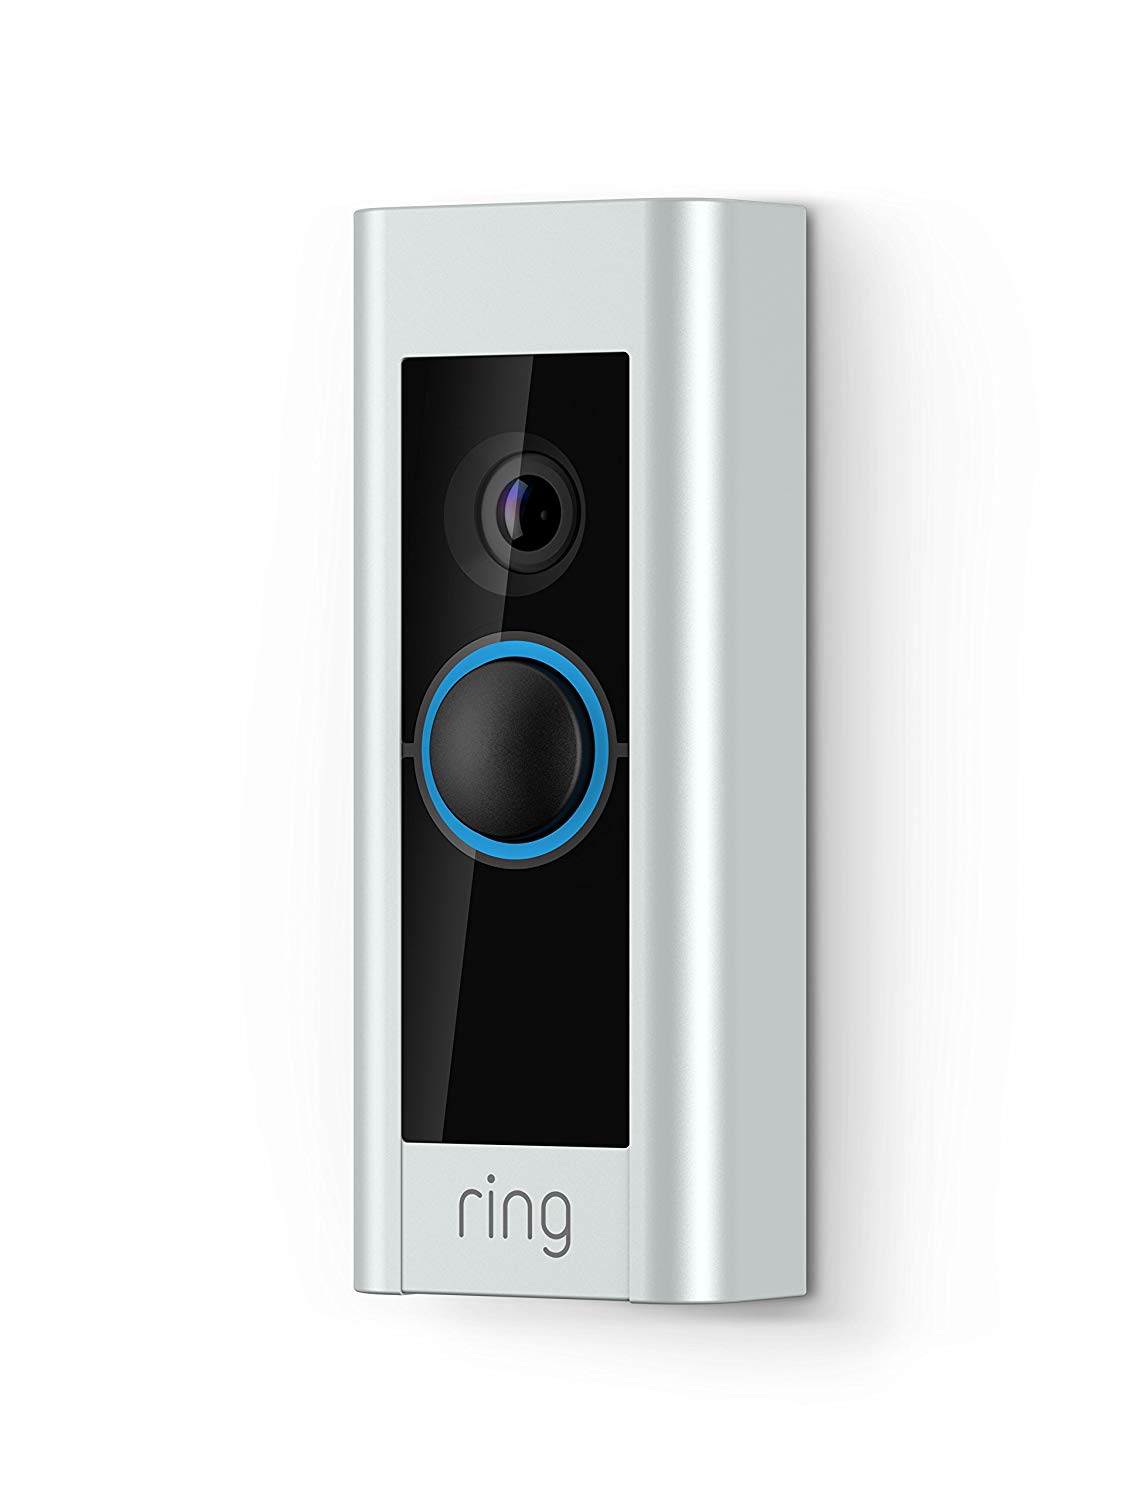 ring video doorbell work with google home